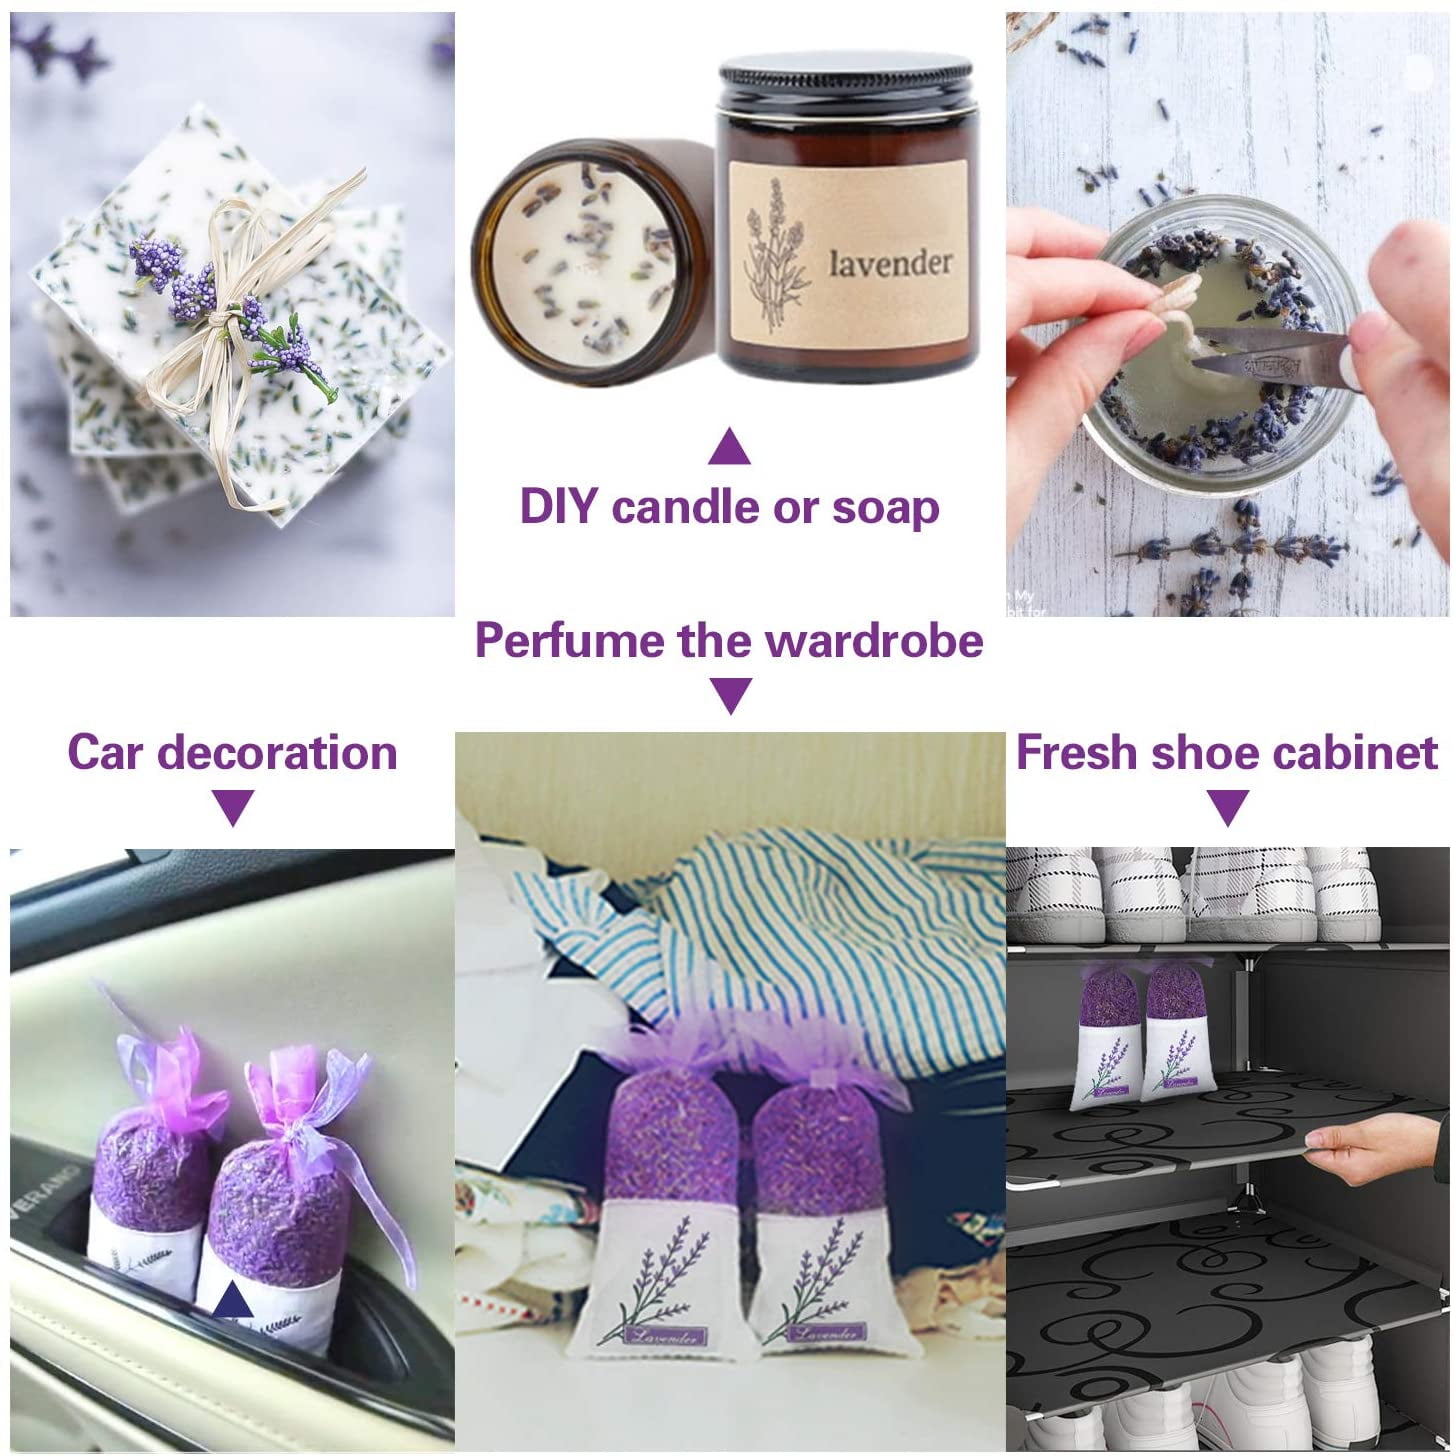  24 Pack Moth Repellent for Closet Lavender Sachet Bags, Cedar  Blocks for Clothes Storage, Cedar Lavender Bags sachets for Drawers and  Closets, Protect Clothing Drawer Freshener : Home & Kitchen